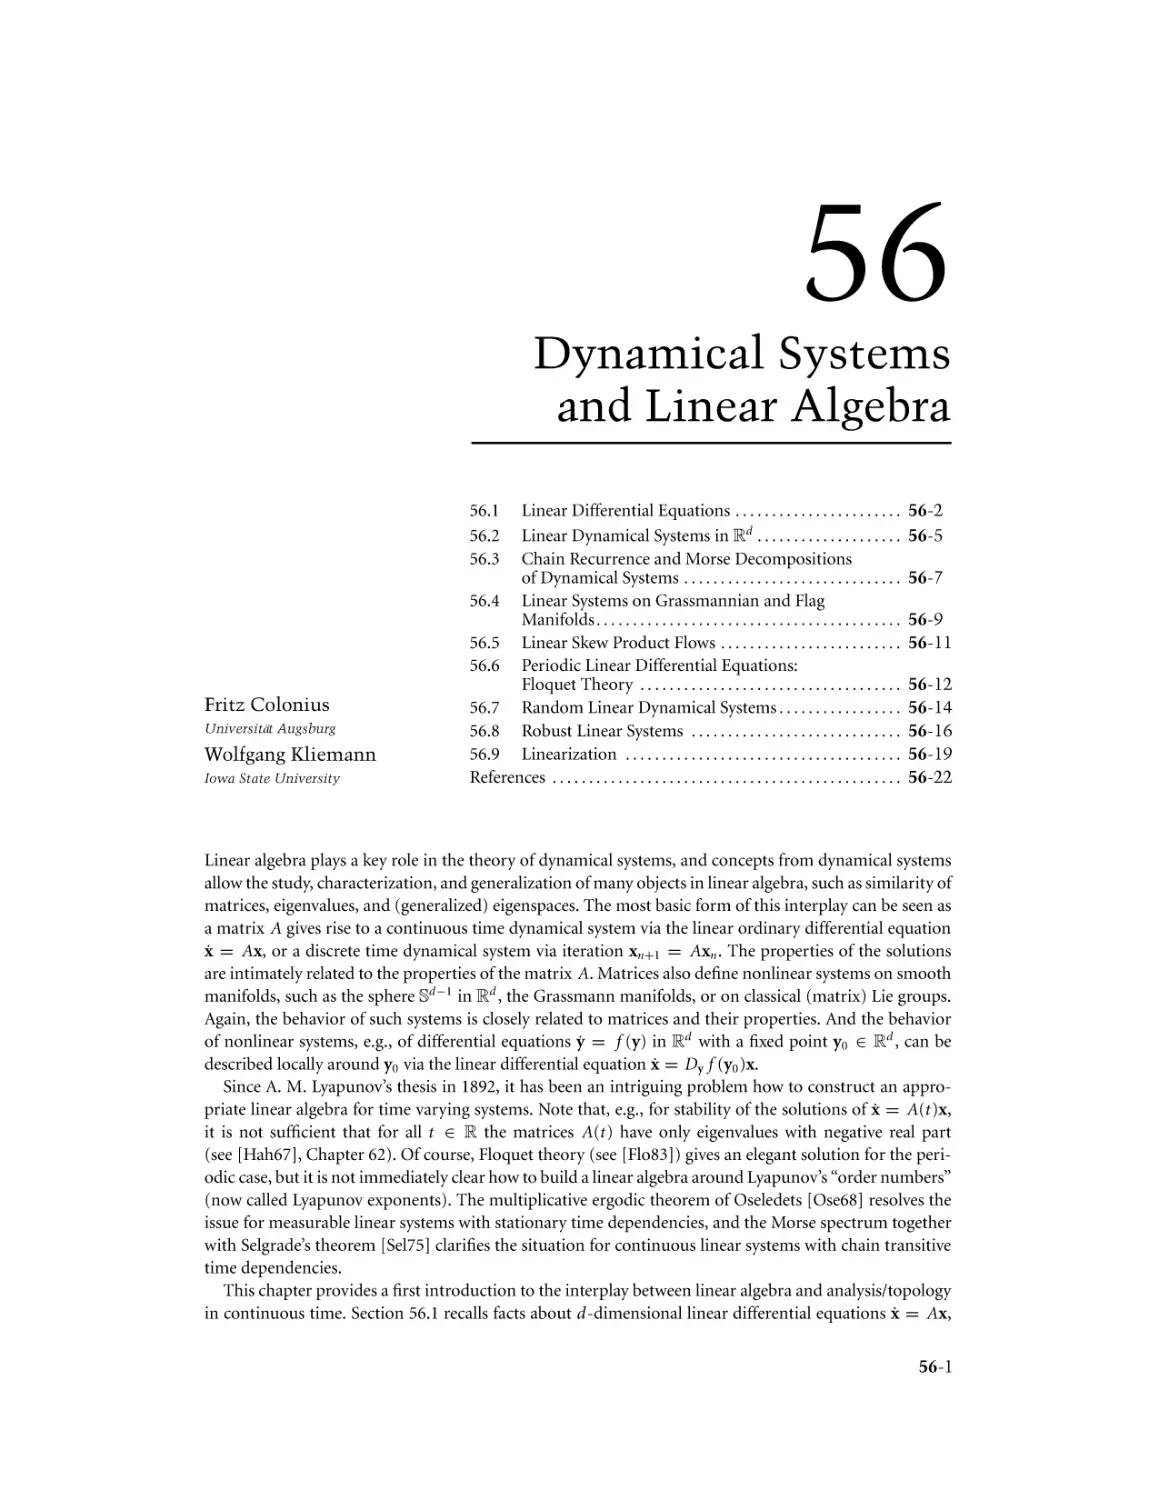 Chapter 56. Dynamical Systems and Linear Algebra